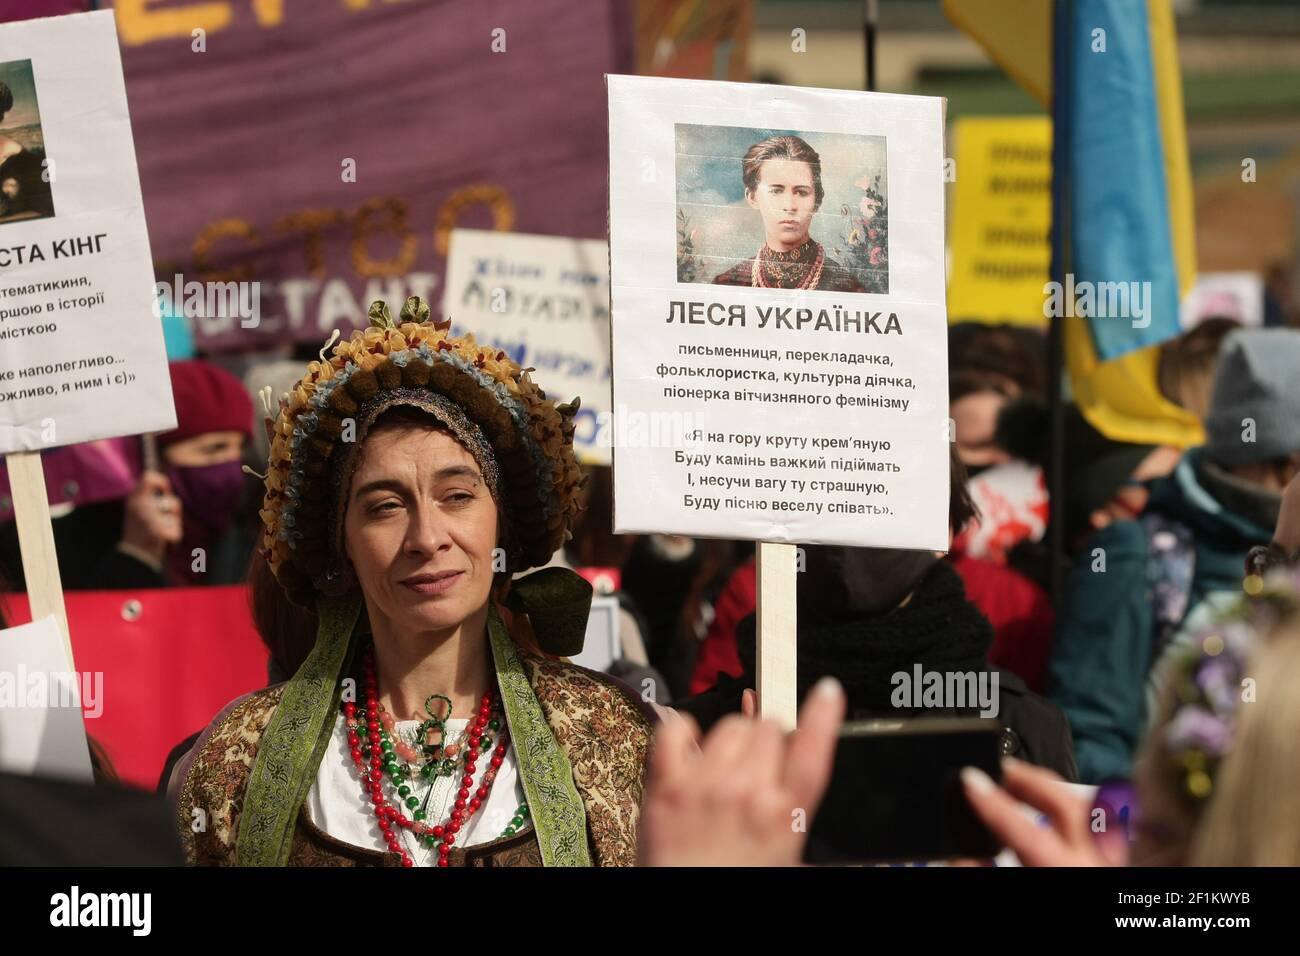 Non Exclusive: KYIV, UKRAINE - MARCH 8, 2021 - A woman in a period costume holds a placard featuring Ukrainian writer Lesya Ukrainka as participants g Stock Photo